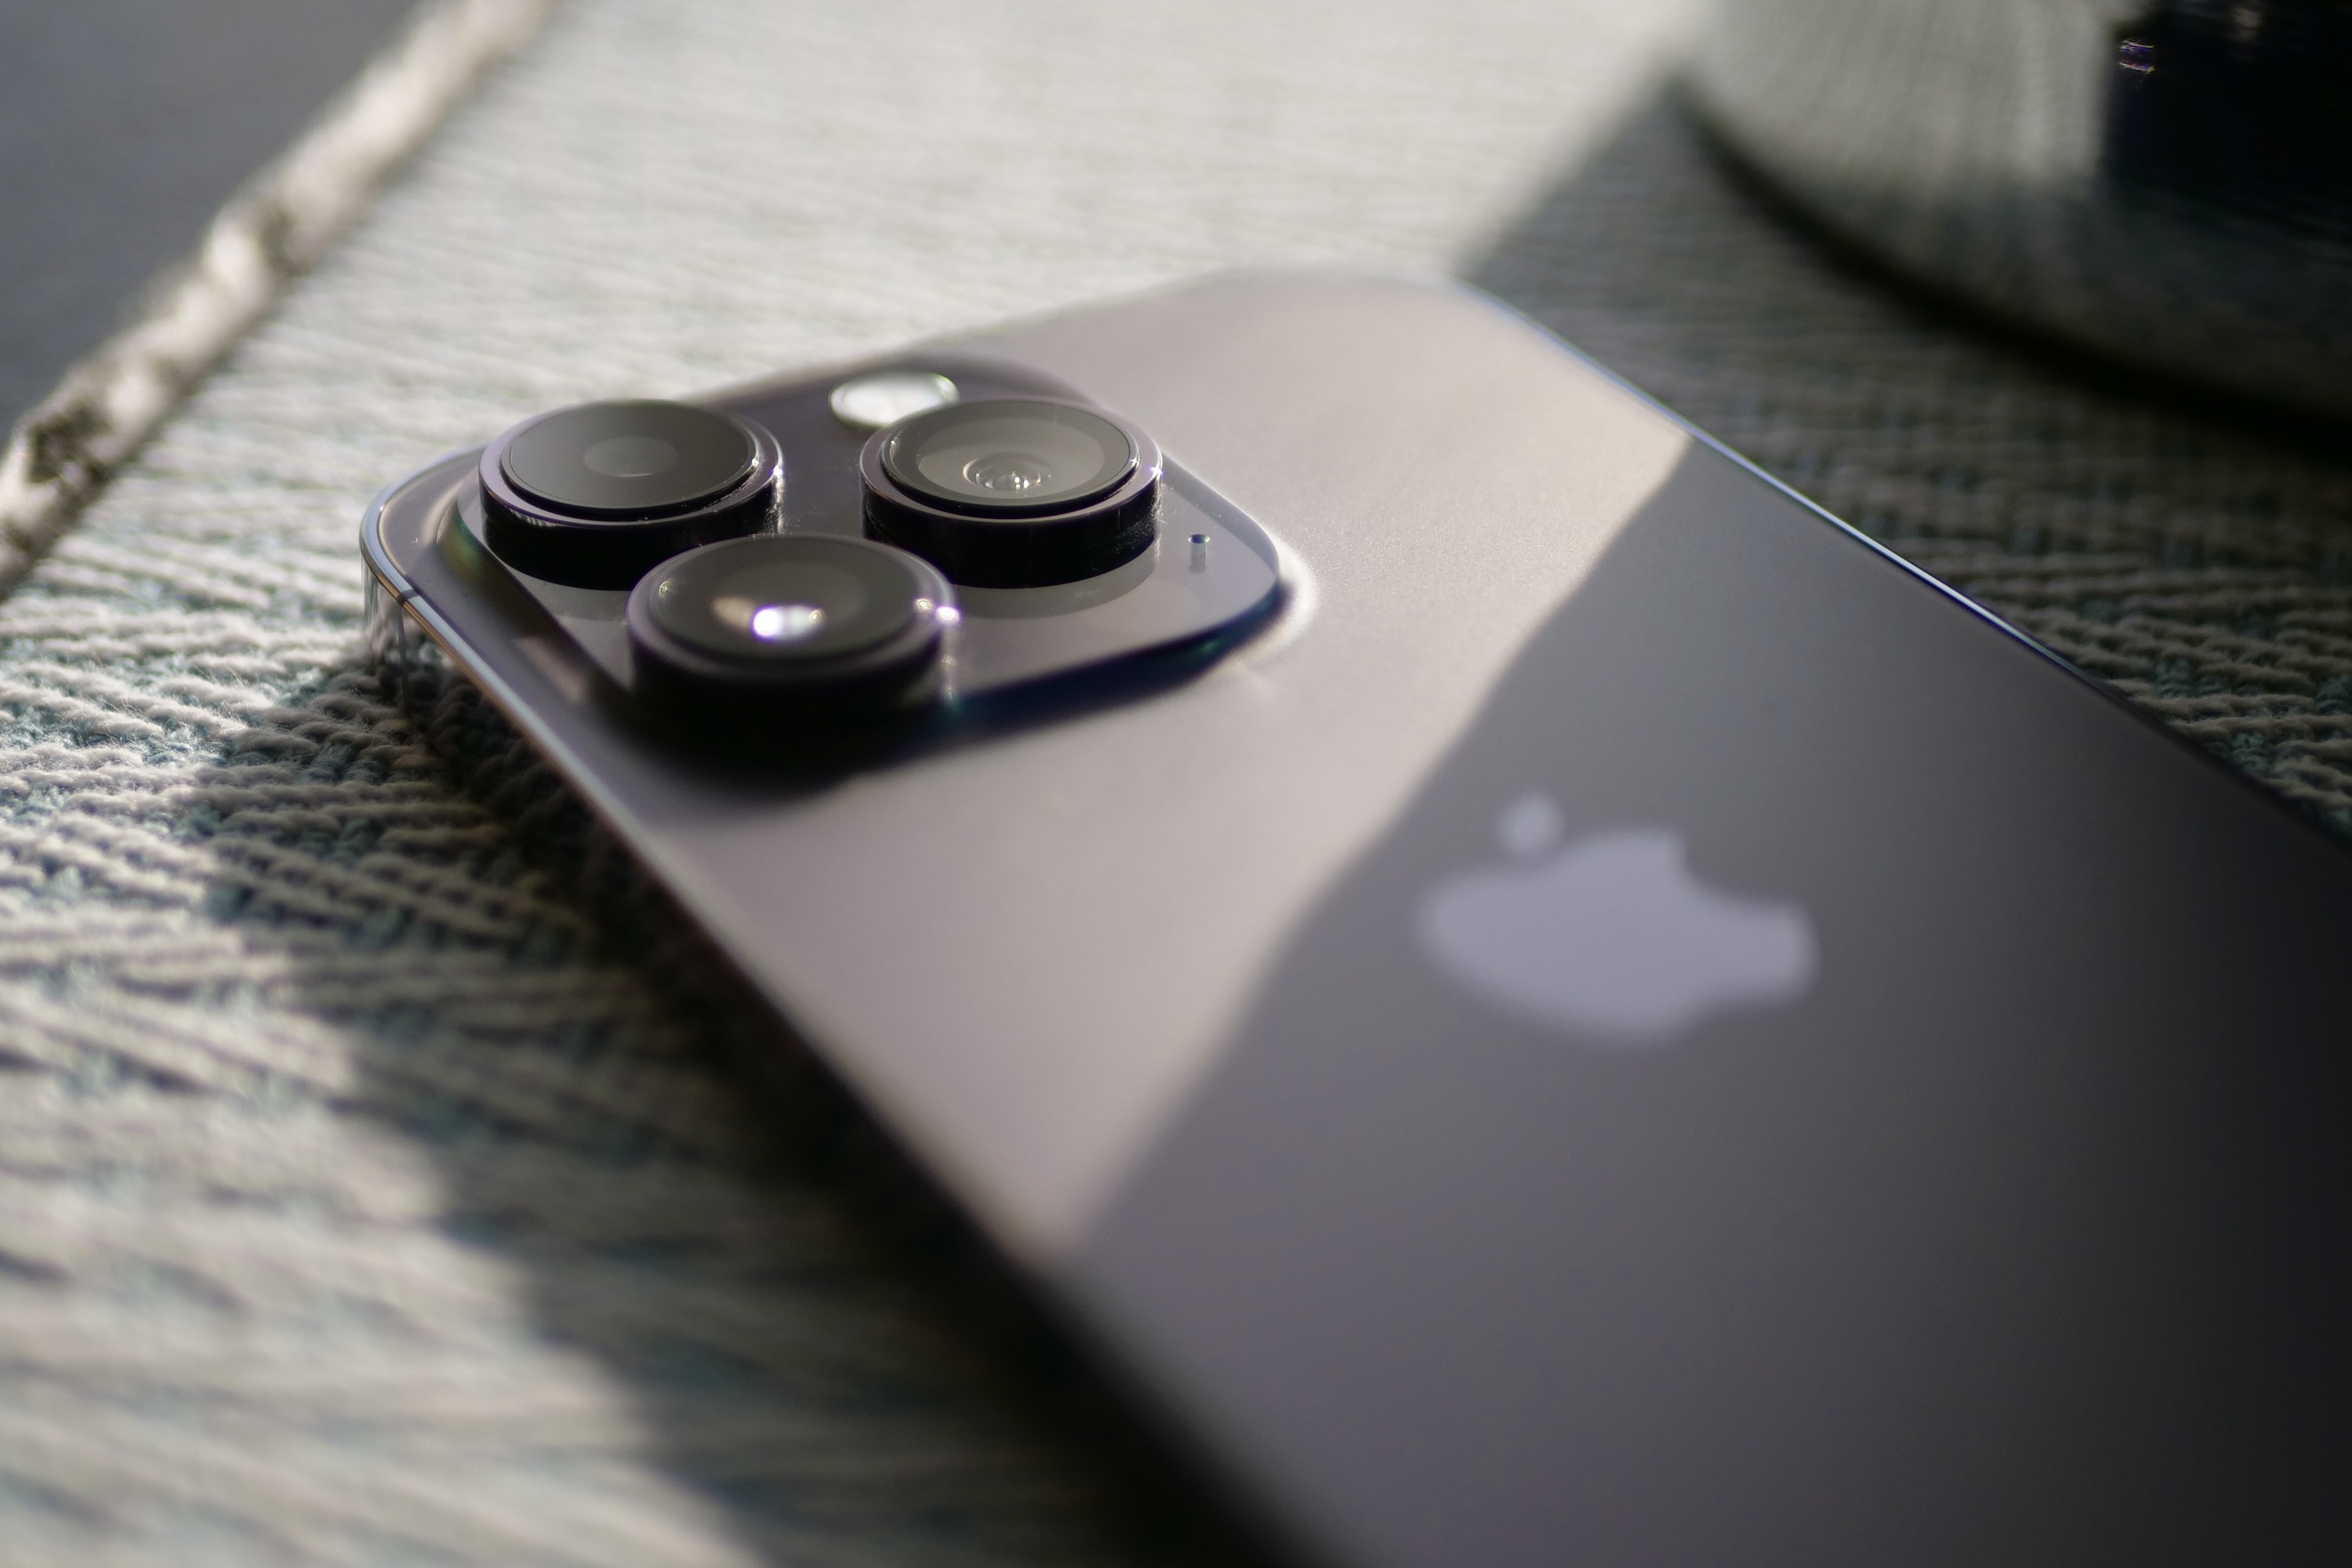 Apple iPhone 14 Pro Review: The Only Camera You Really Need